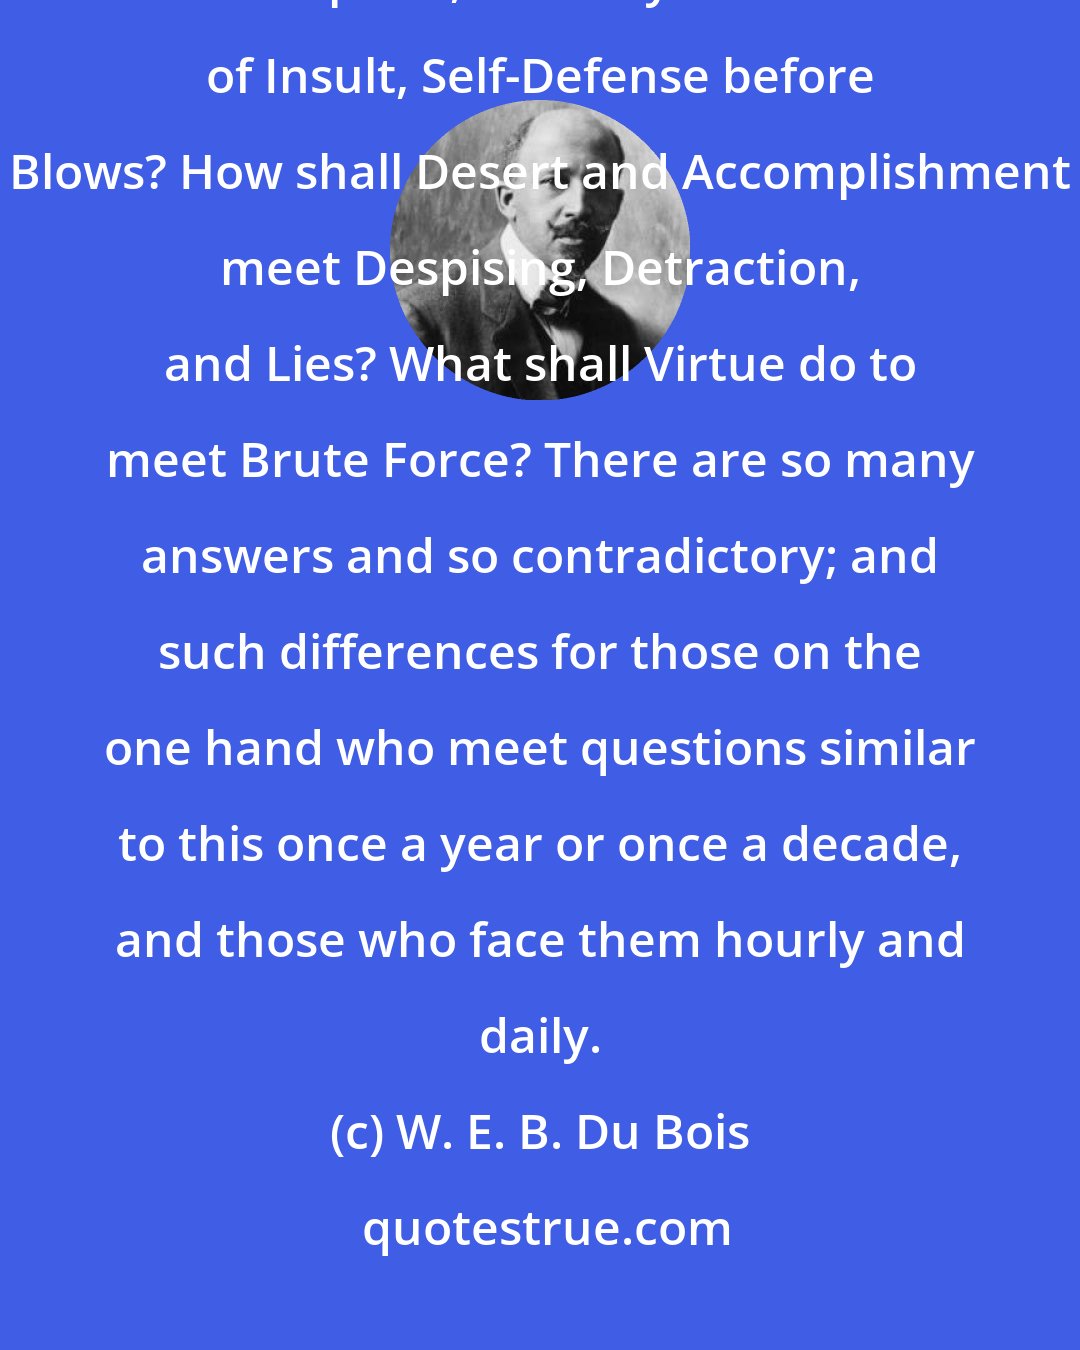 W. E. B. Du Bois: How shall Integrity face Oppression? What shall Honesty do in the face of Deception, Decency in the face of Insult, Self-Defense before Blows? How shall Desert and Accomplishment meet Despising, Detraction, and Lies? What shall Virtue do to meet Brute Force? There are so many answers and so contradictory; and such differences for those on the one hand who meet questions similar to this once a year or once a decade, and those who face them hourly and daily.